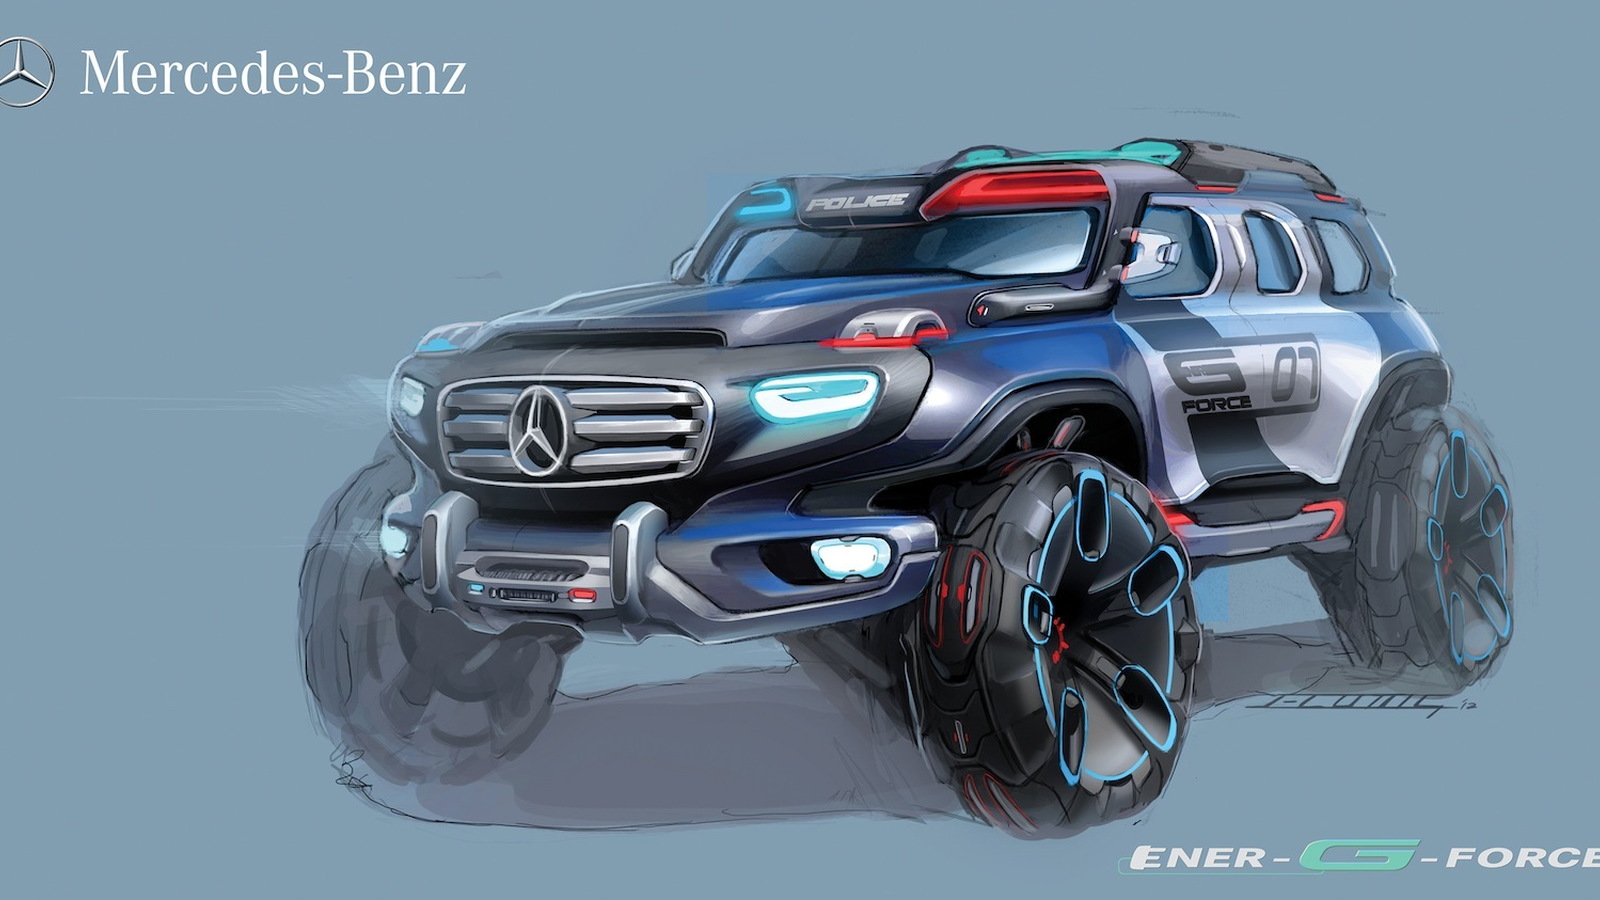 Entries into the 'Highway Patrol Vehicle of 2025' design challenge